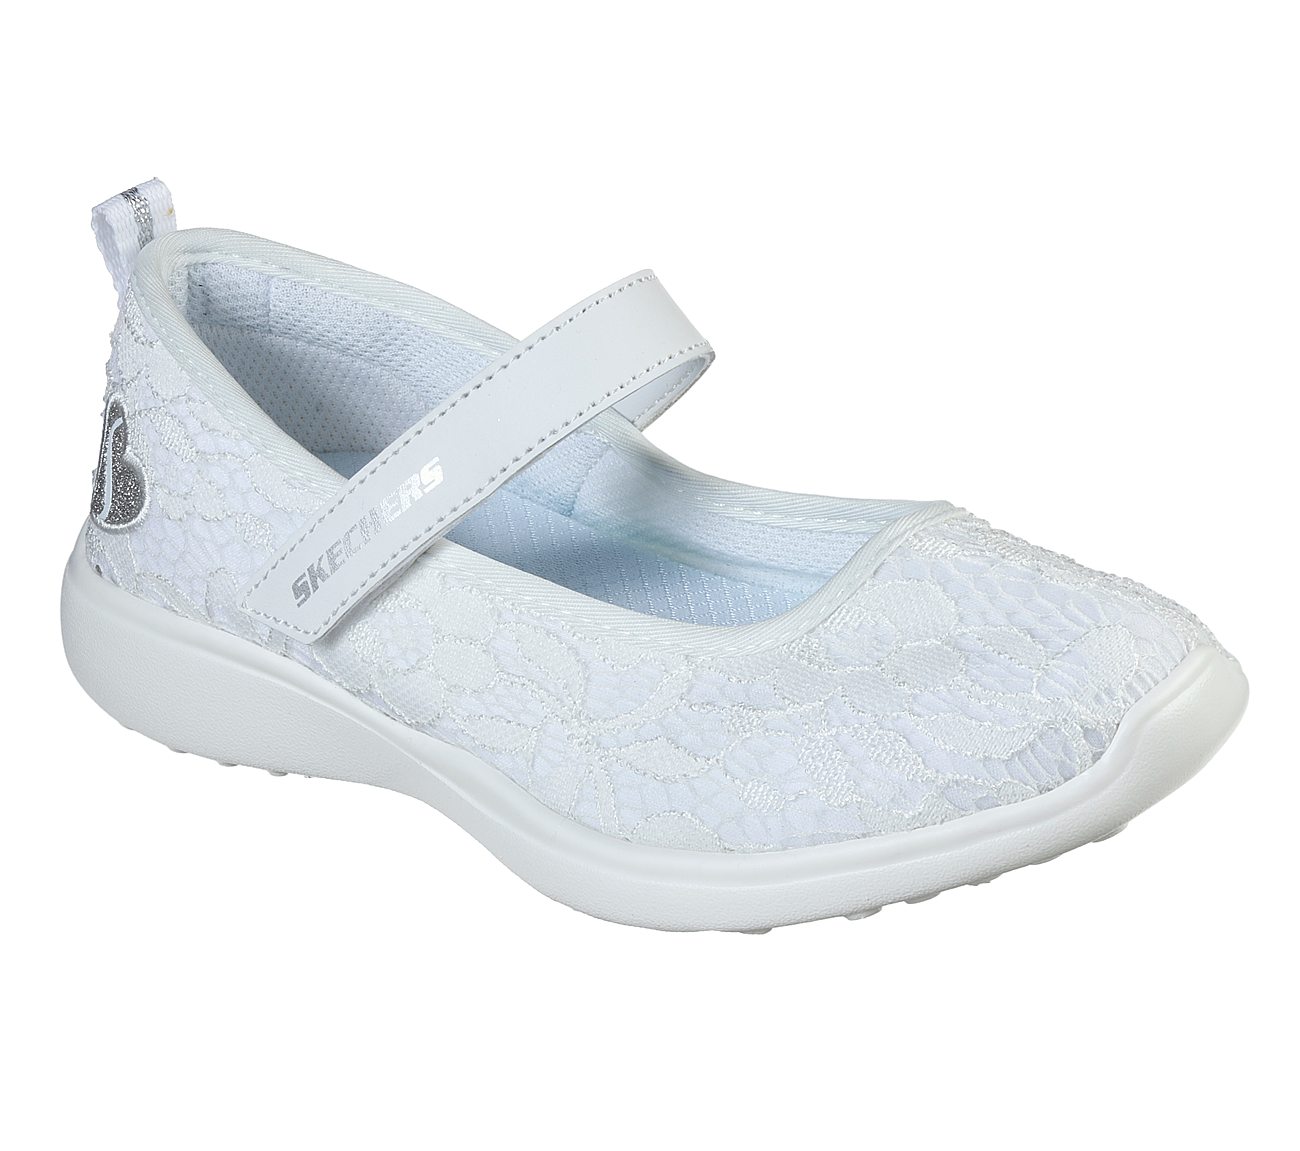 skechers fabric shoes